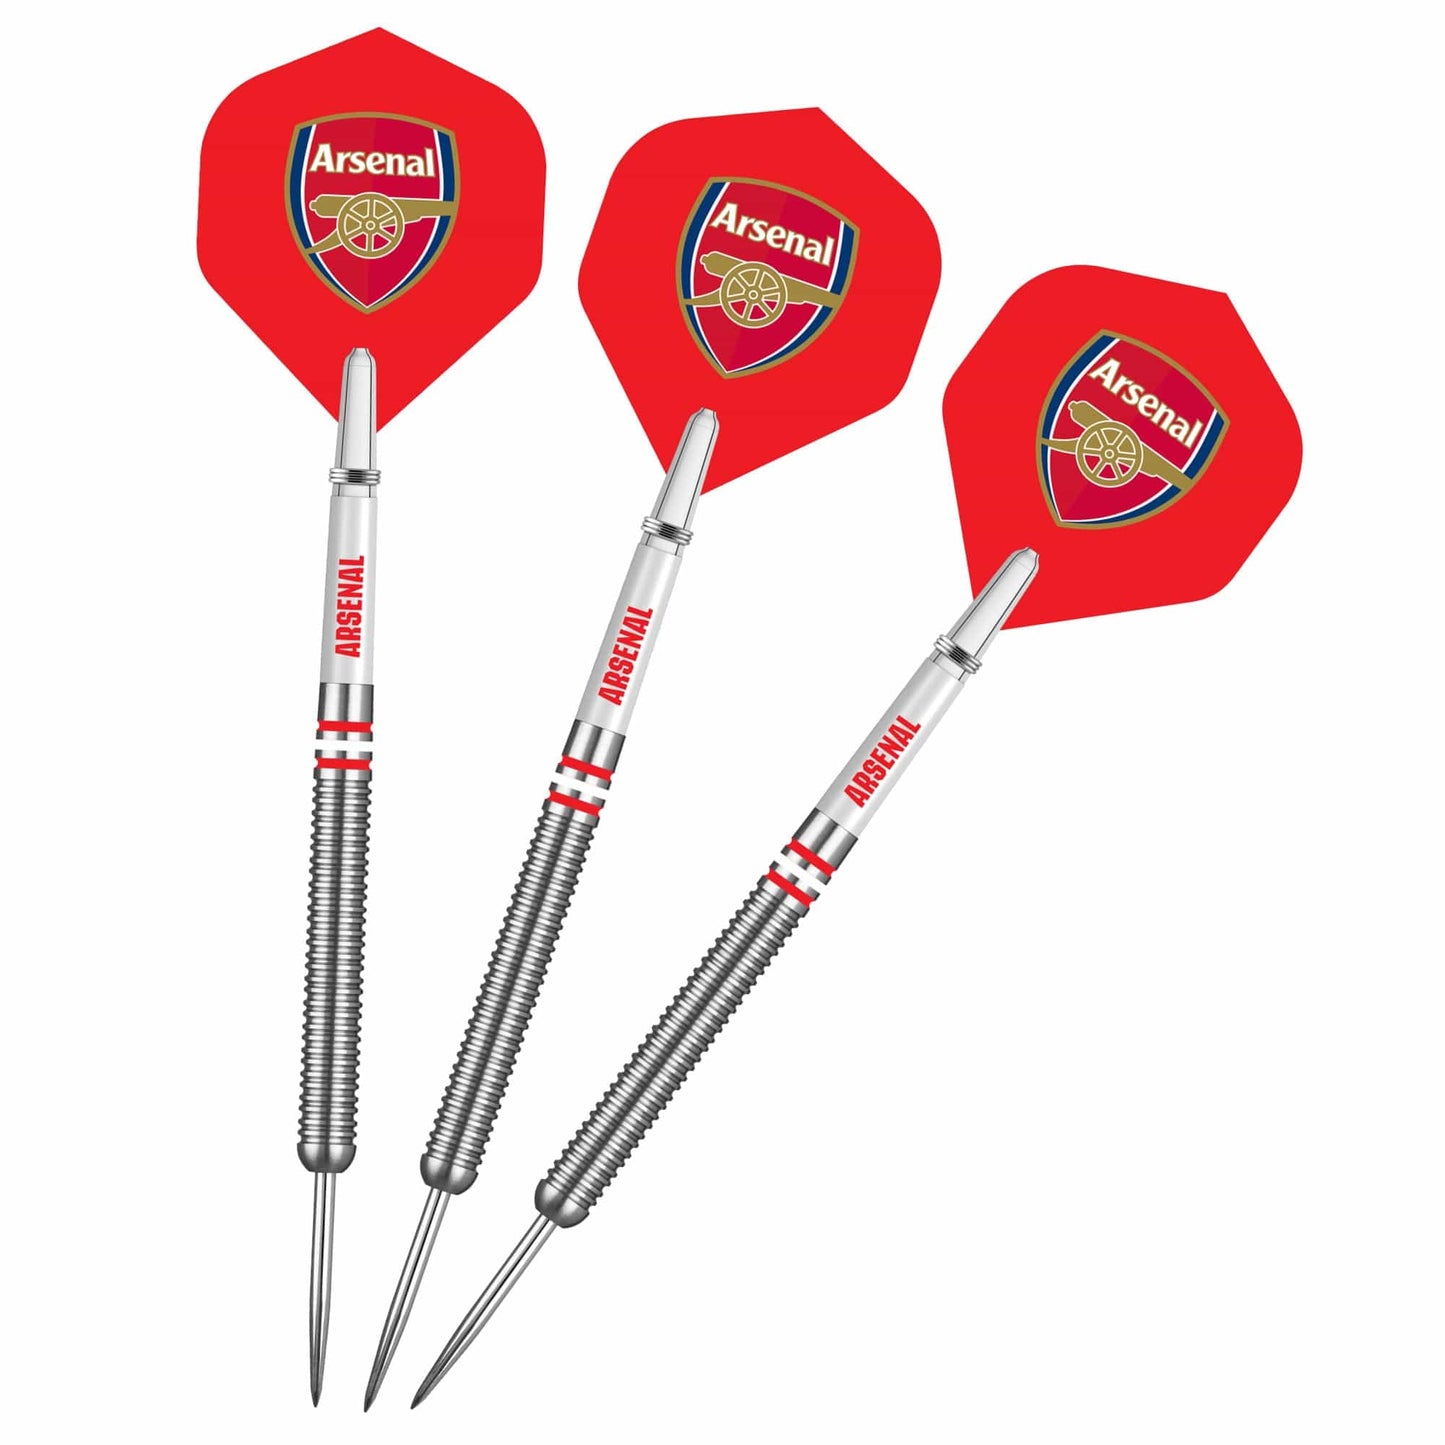 Arsenal FC Darts - Steel Tip Tungsten - Official Licensed - The Gunners - 24g 24g